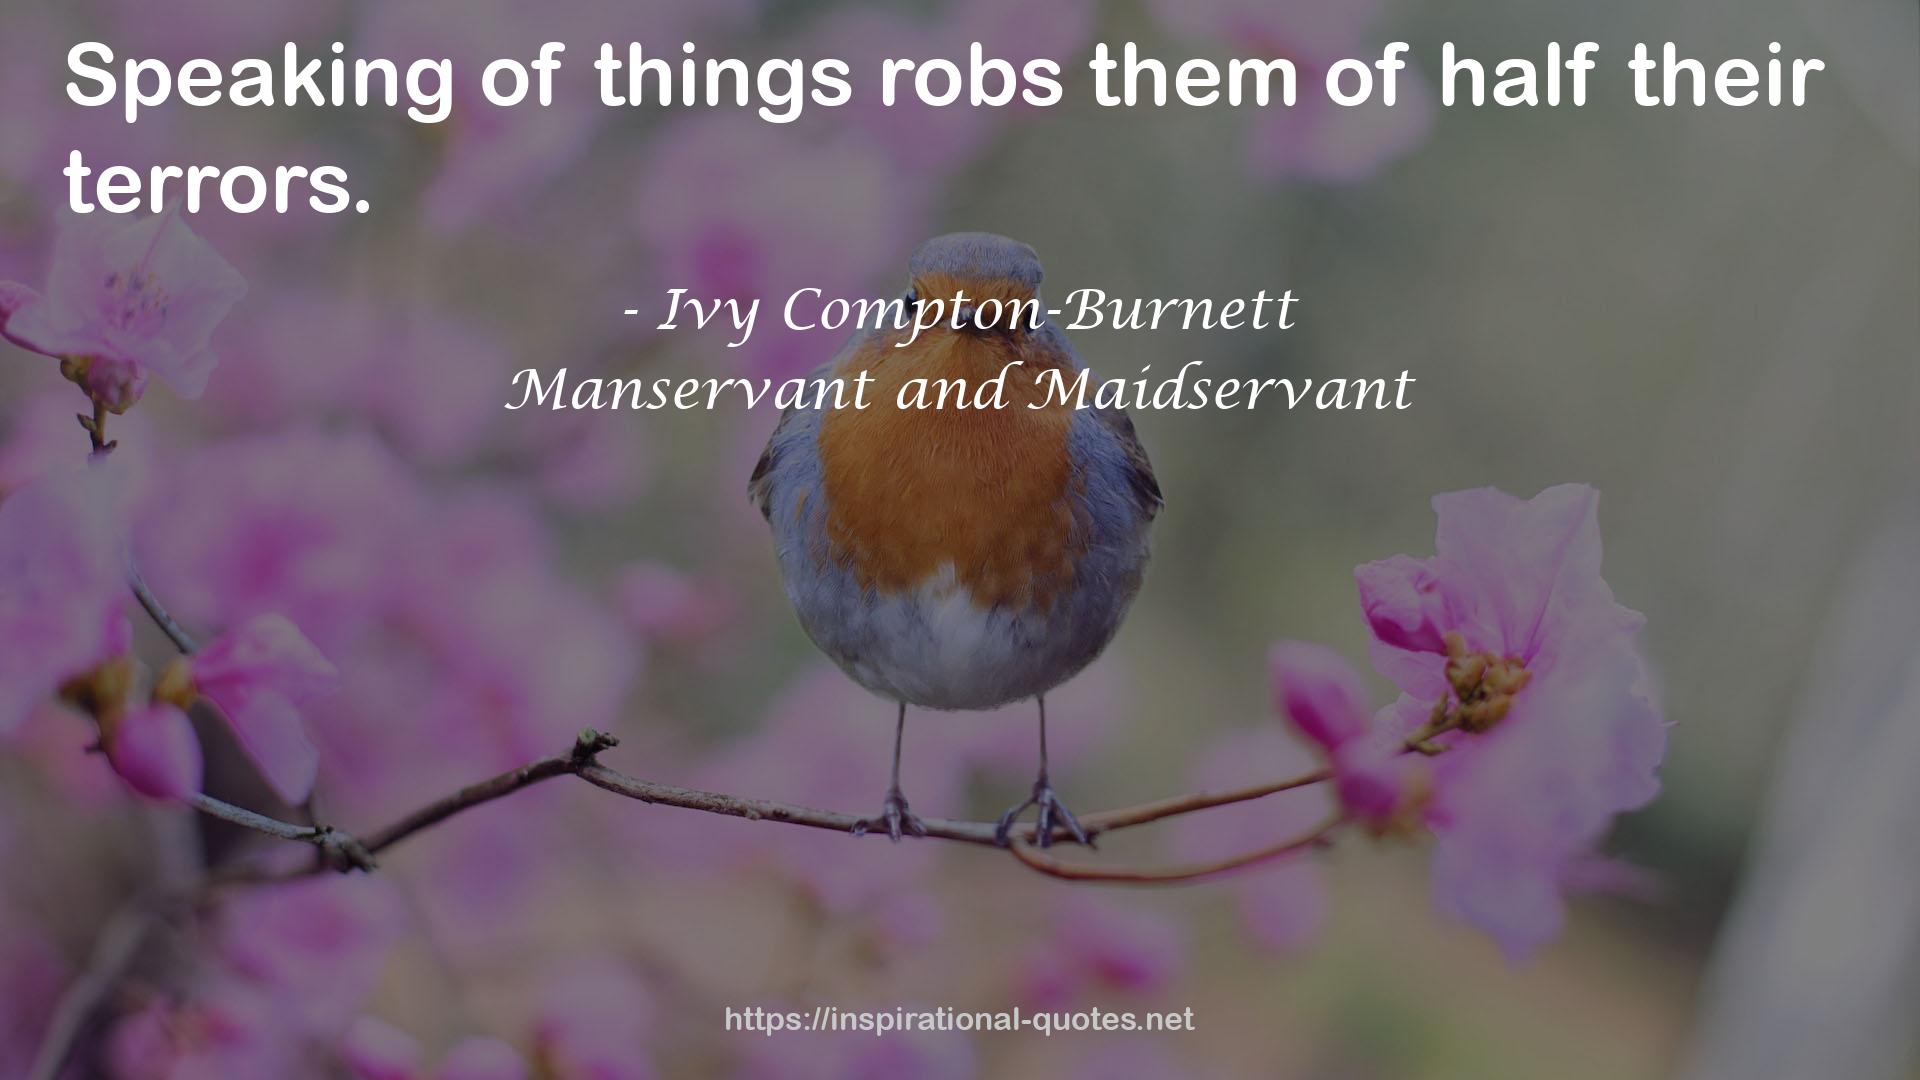 Manservant and Maidservant QUOTES